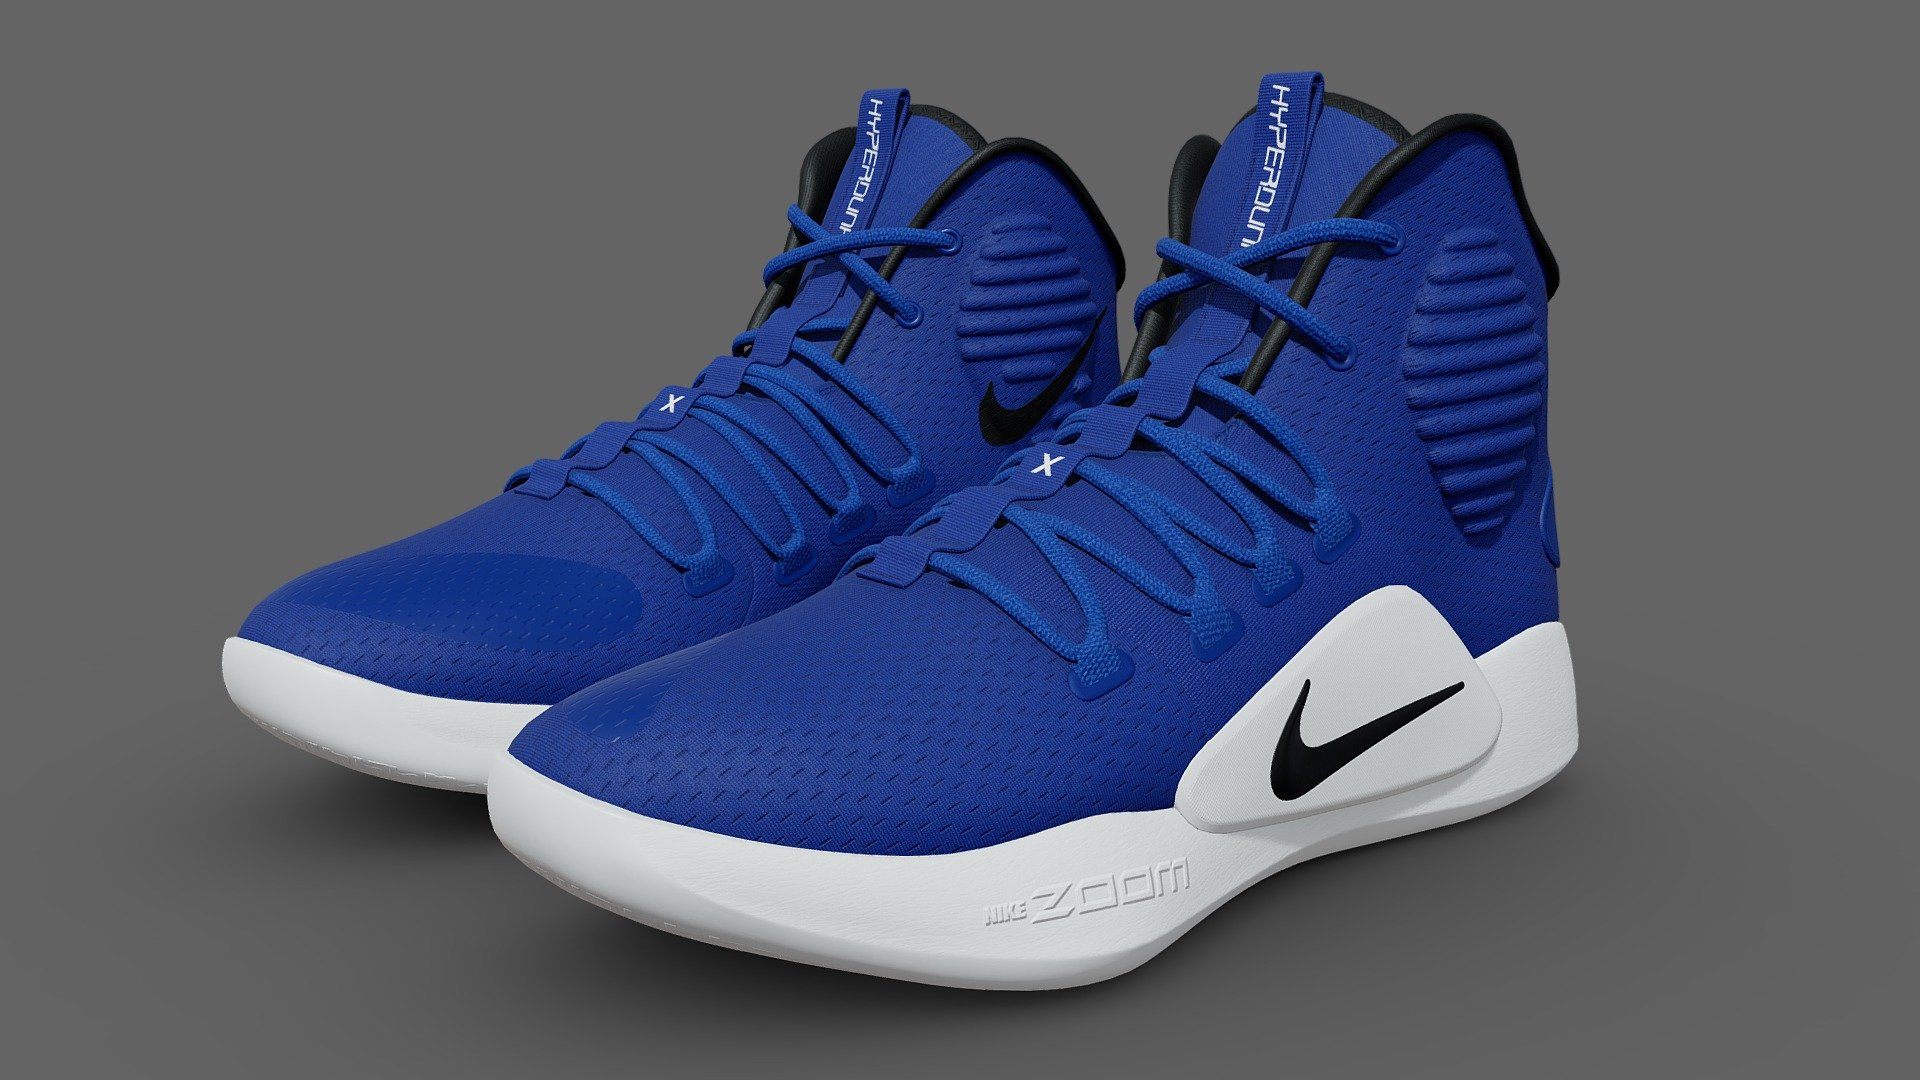 Nike Basketball Shoes Hyperdunk X EP

This model is suitable for use in broadcast, film , advertising, visualization, games. etc
The model is accurate with the real world size and scale
Easily Compatible with Unity 3d

**[ TEXTURES ] **

Textures Formats: PNG 8192 x 8192 

Textures Formats: PNG 4096 x 4096

Blender file included with 8K Textures Embedded within the file.
Both the shoes share the same textures except for the Roughness &amp; Normap Map which is named as Right for the right shoe. 
UVs are non-overlapping and unwrapped in a very clean manner 3d model